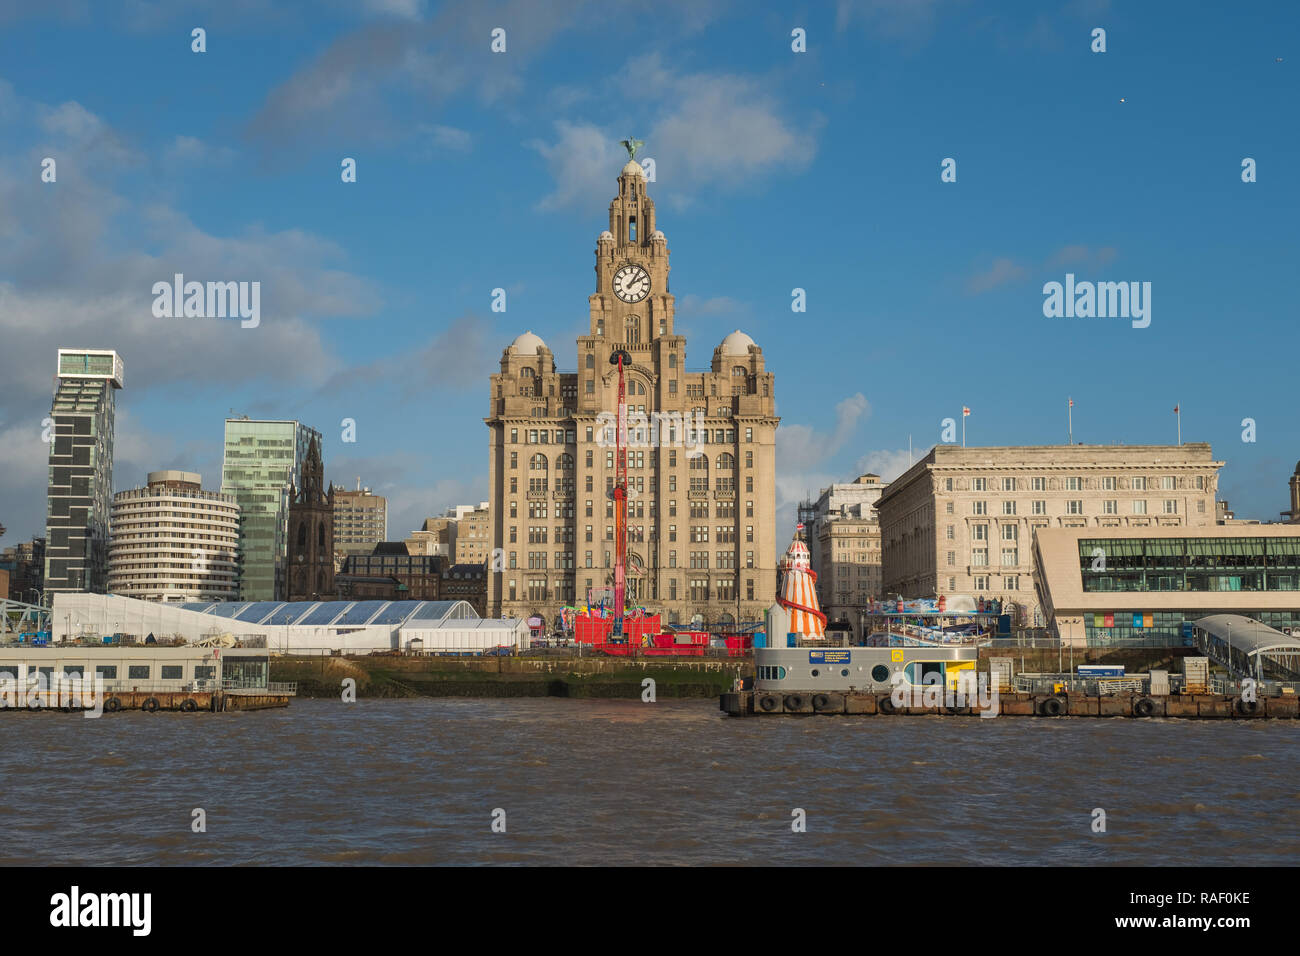 View of the Royal Liver Building from the river, Liverpool Stock Photo